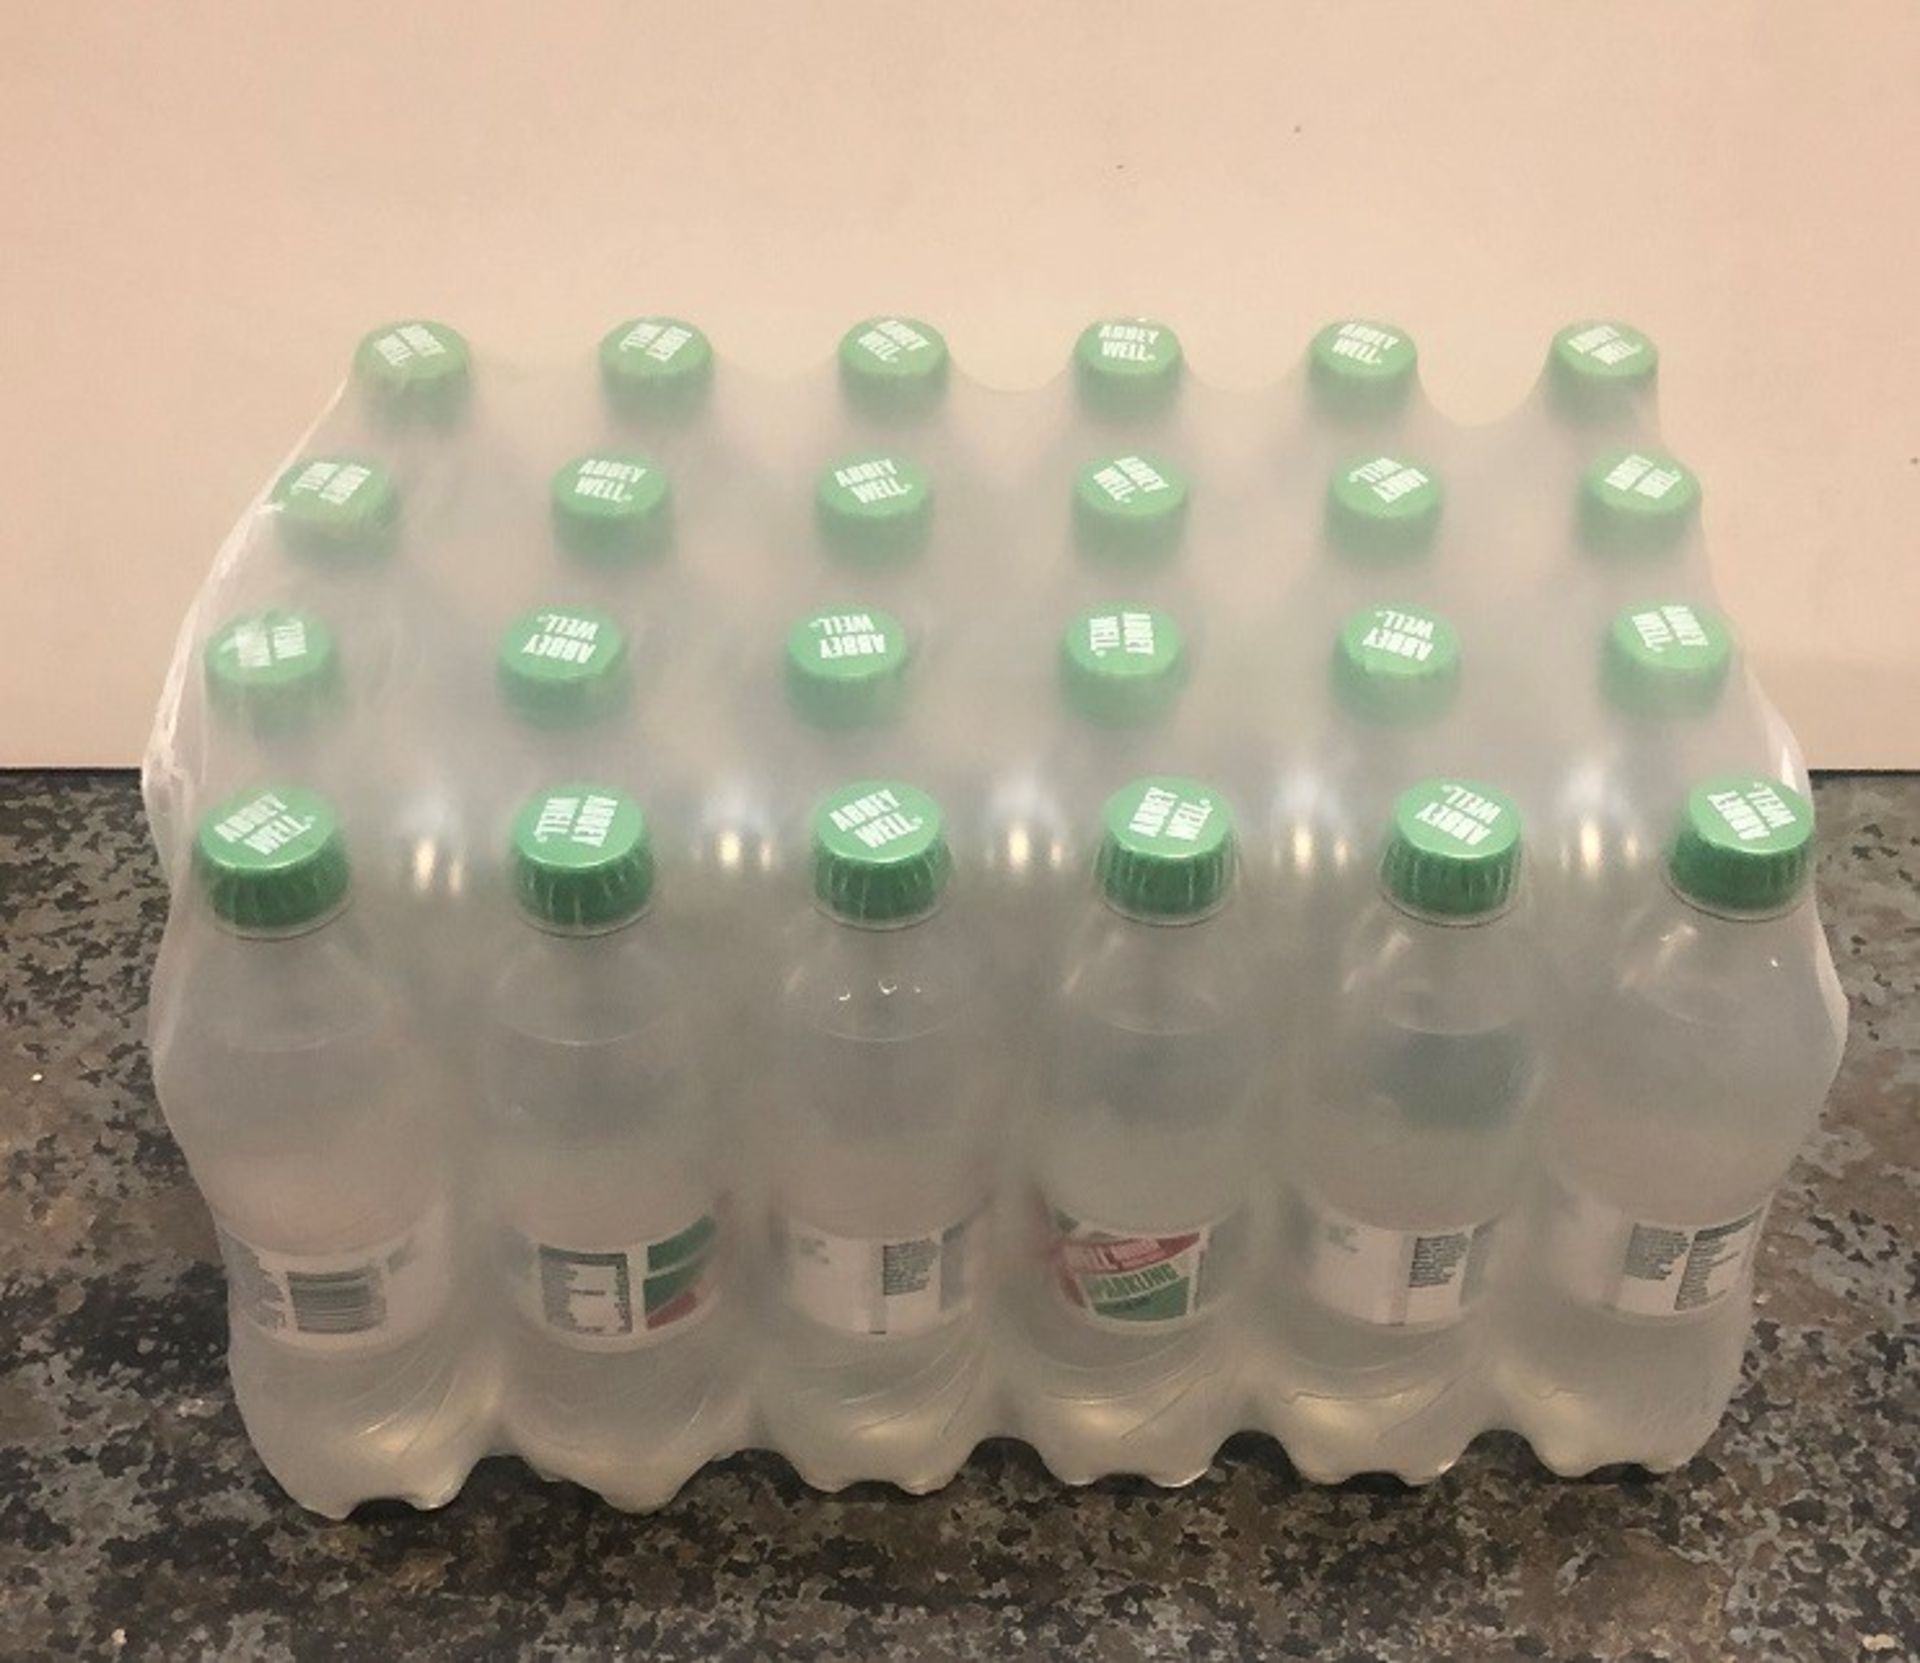 1 LOT TO CONTAIN 12 LARGE PACKS OF ABBEY WELL SPARKLING WATER / 24 BOTTLES PER PACK / BEST BEFORE: